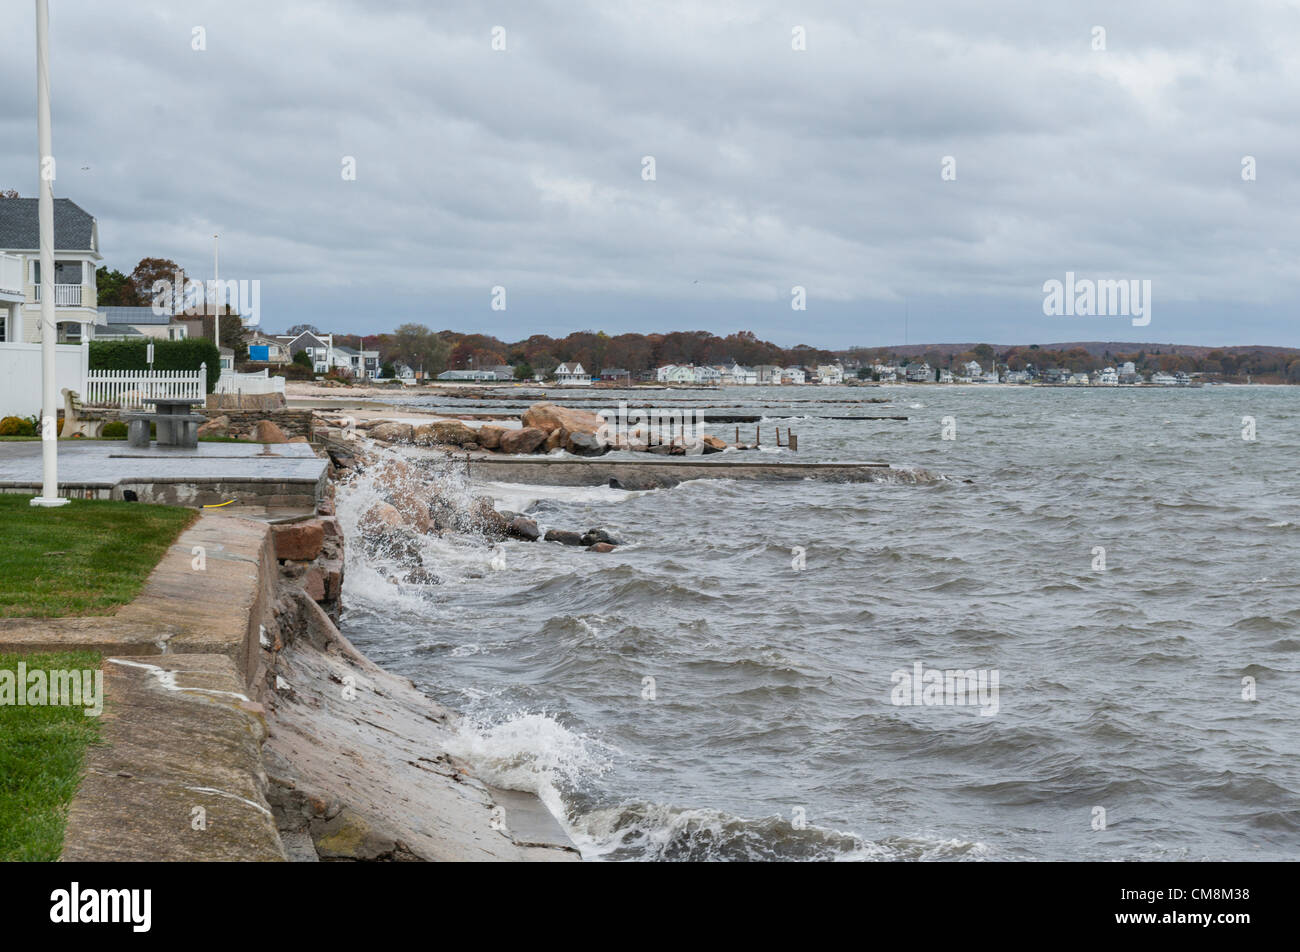 Niantic, East Lyme, Connecticut USA The day before Hurricane Sandy hit ( 28 Oct 2012) waves crash against the bulkheads built to protect homes along the Connecticut shoreline. Pictured is the beach community of Black Point. In the distance you can see Attawan Beach. Stock Photo